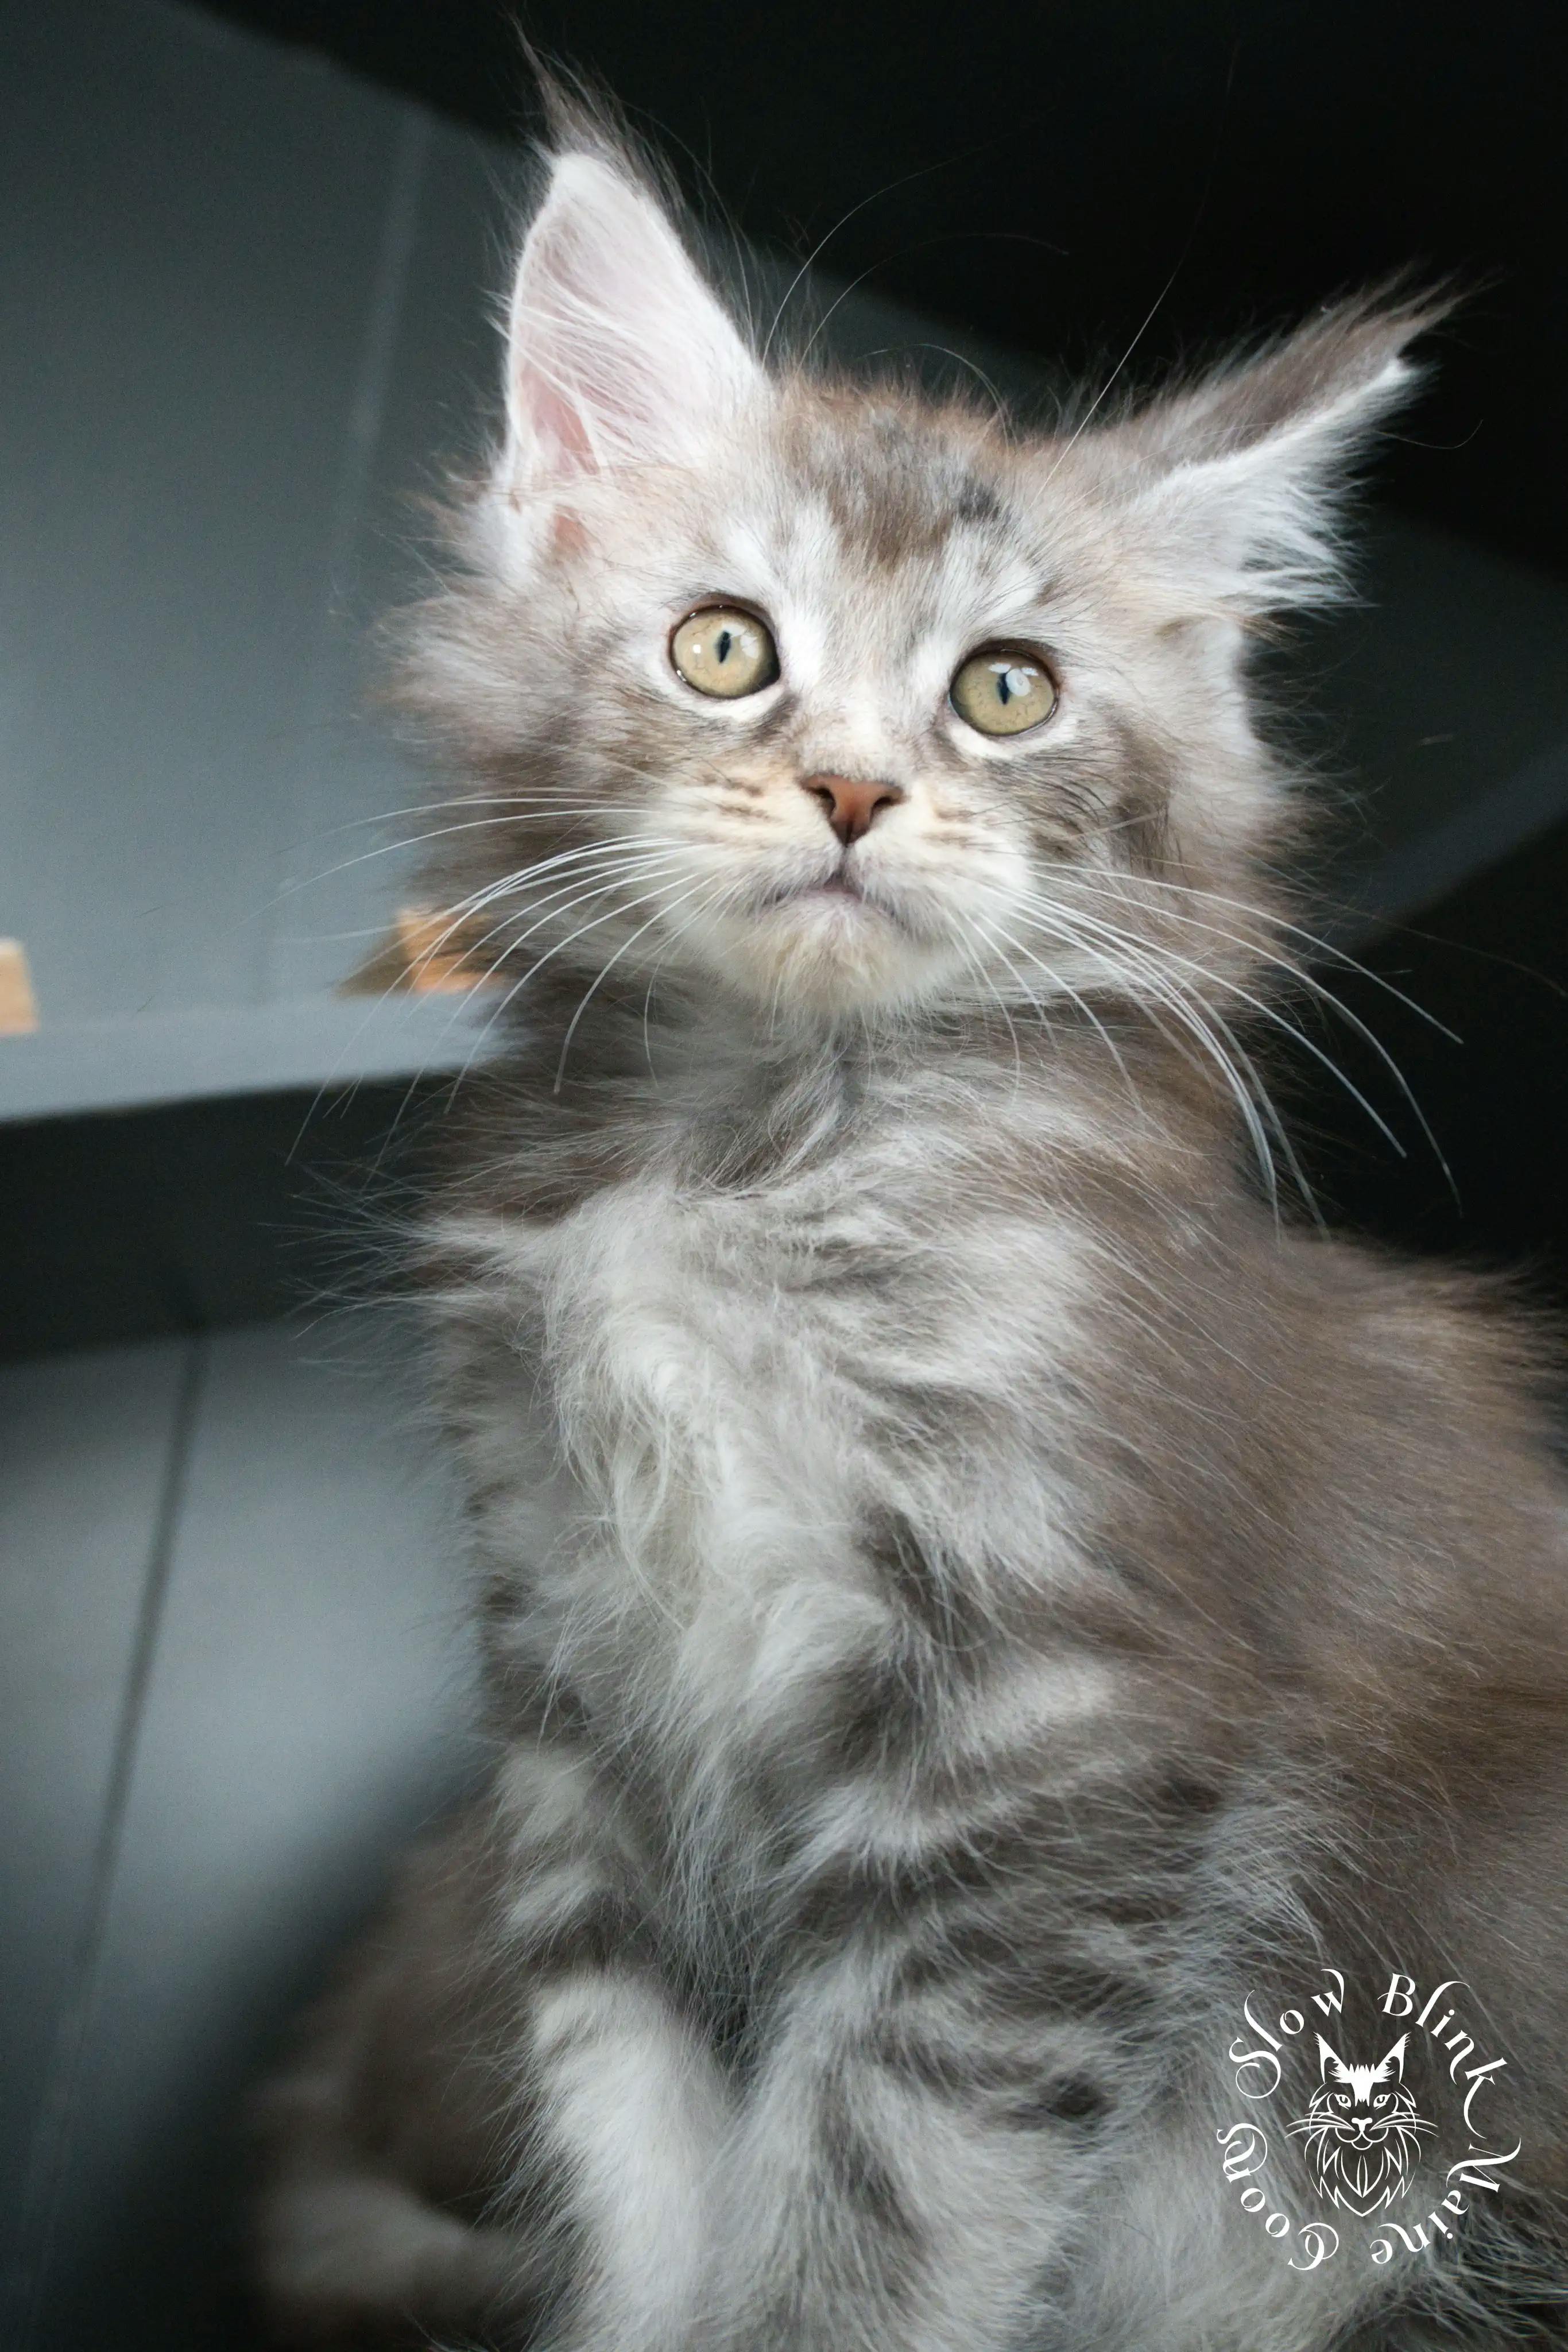 Blue Silver Tabby Maine Coon Kittens > blue silver tabby maine coon kitten | slowblinkmainecoons | 429